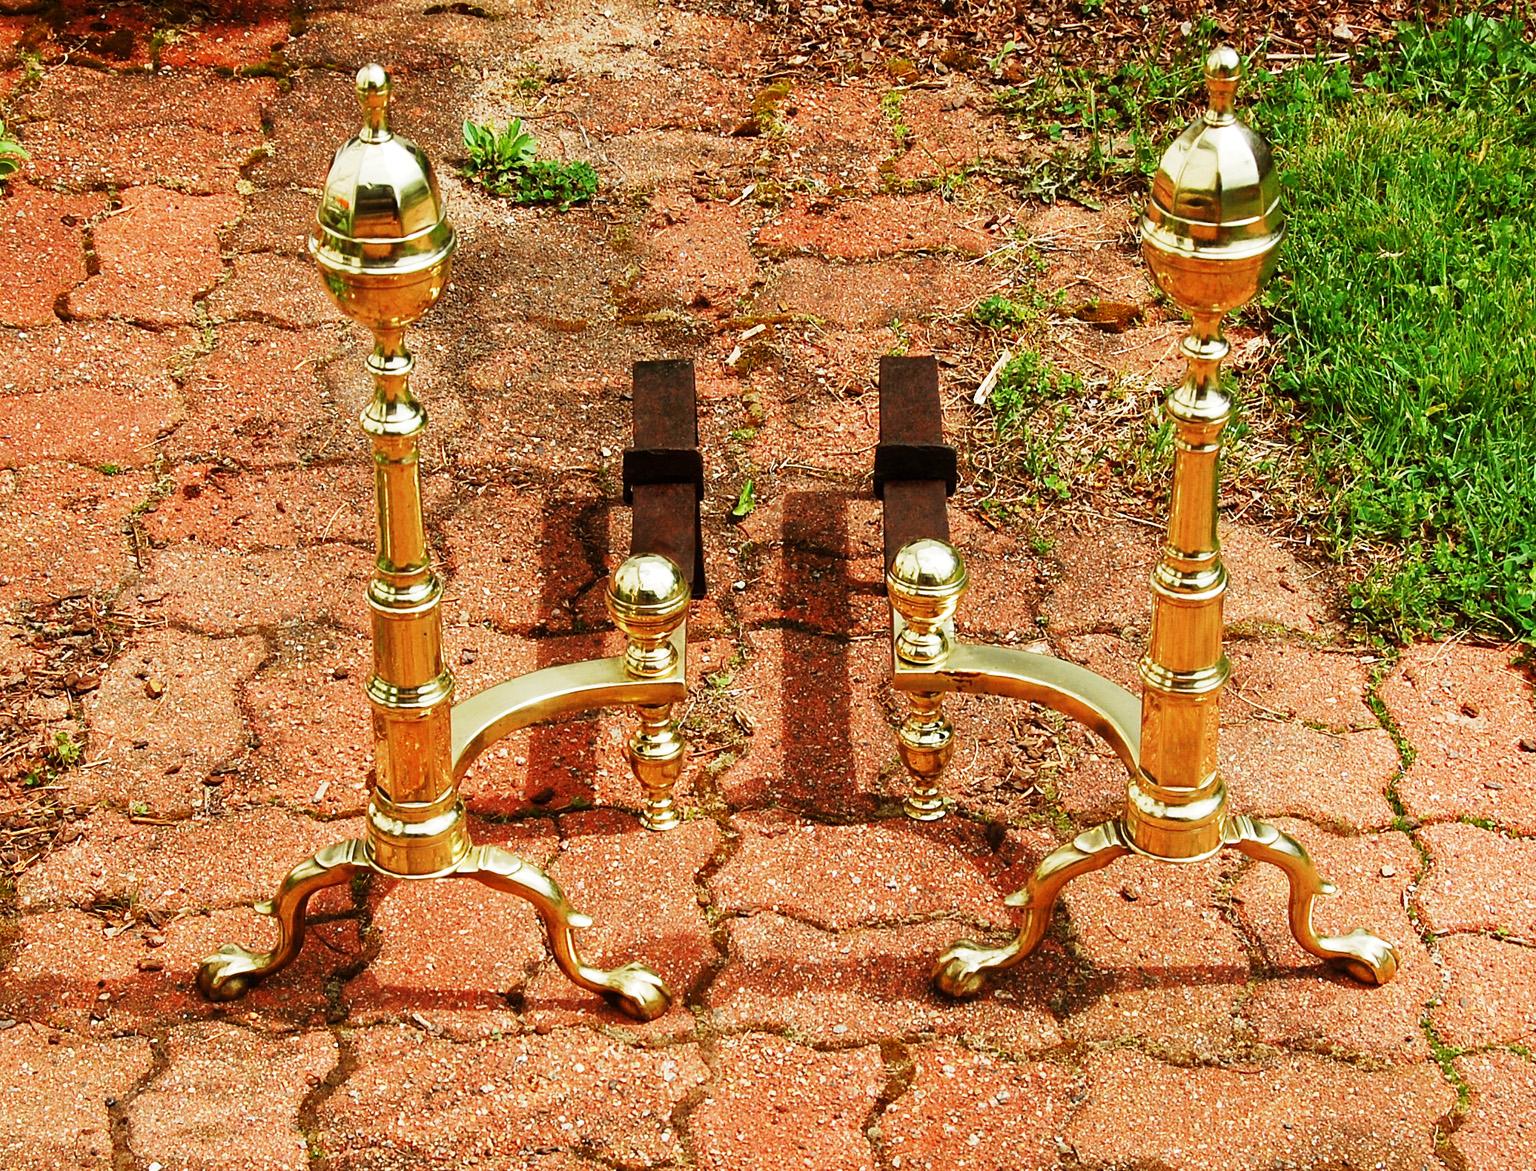 American Federal Philadelphia cast brass faceted acorn top large andirons. The motif of faceting is repeated in the stepped faceted column as well as on the acorns. The columns rest on cabriole legs with spurred knees and ball and claw feet. As one